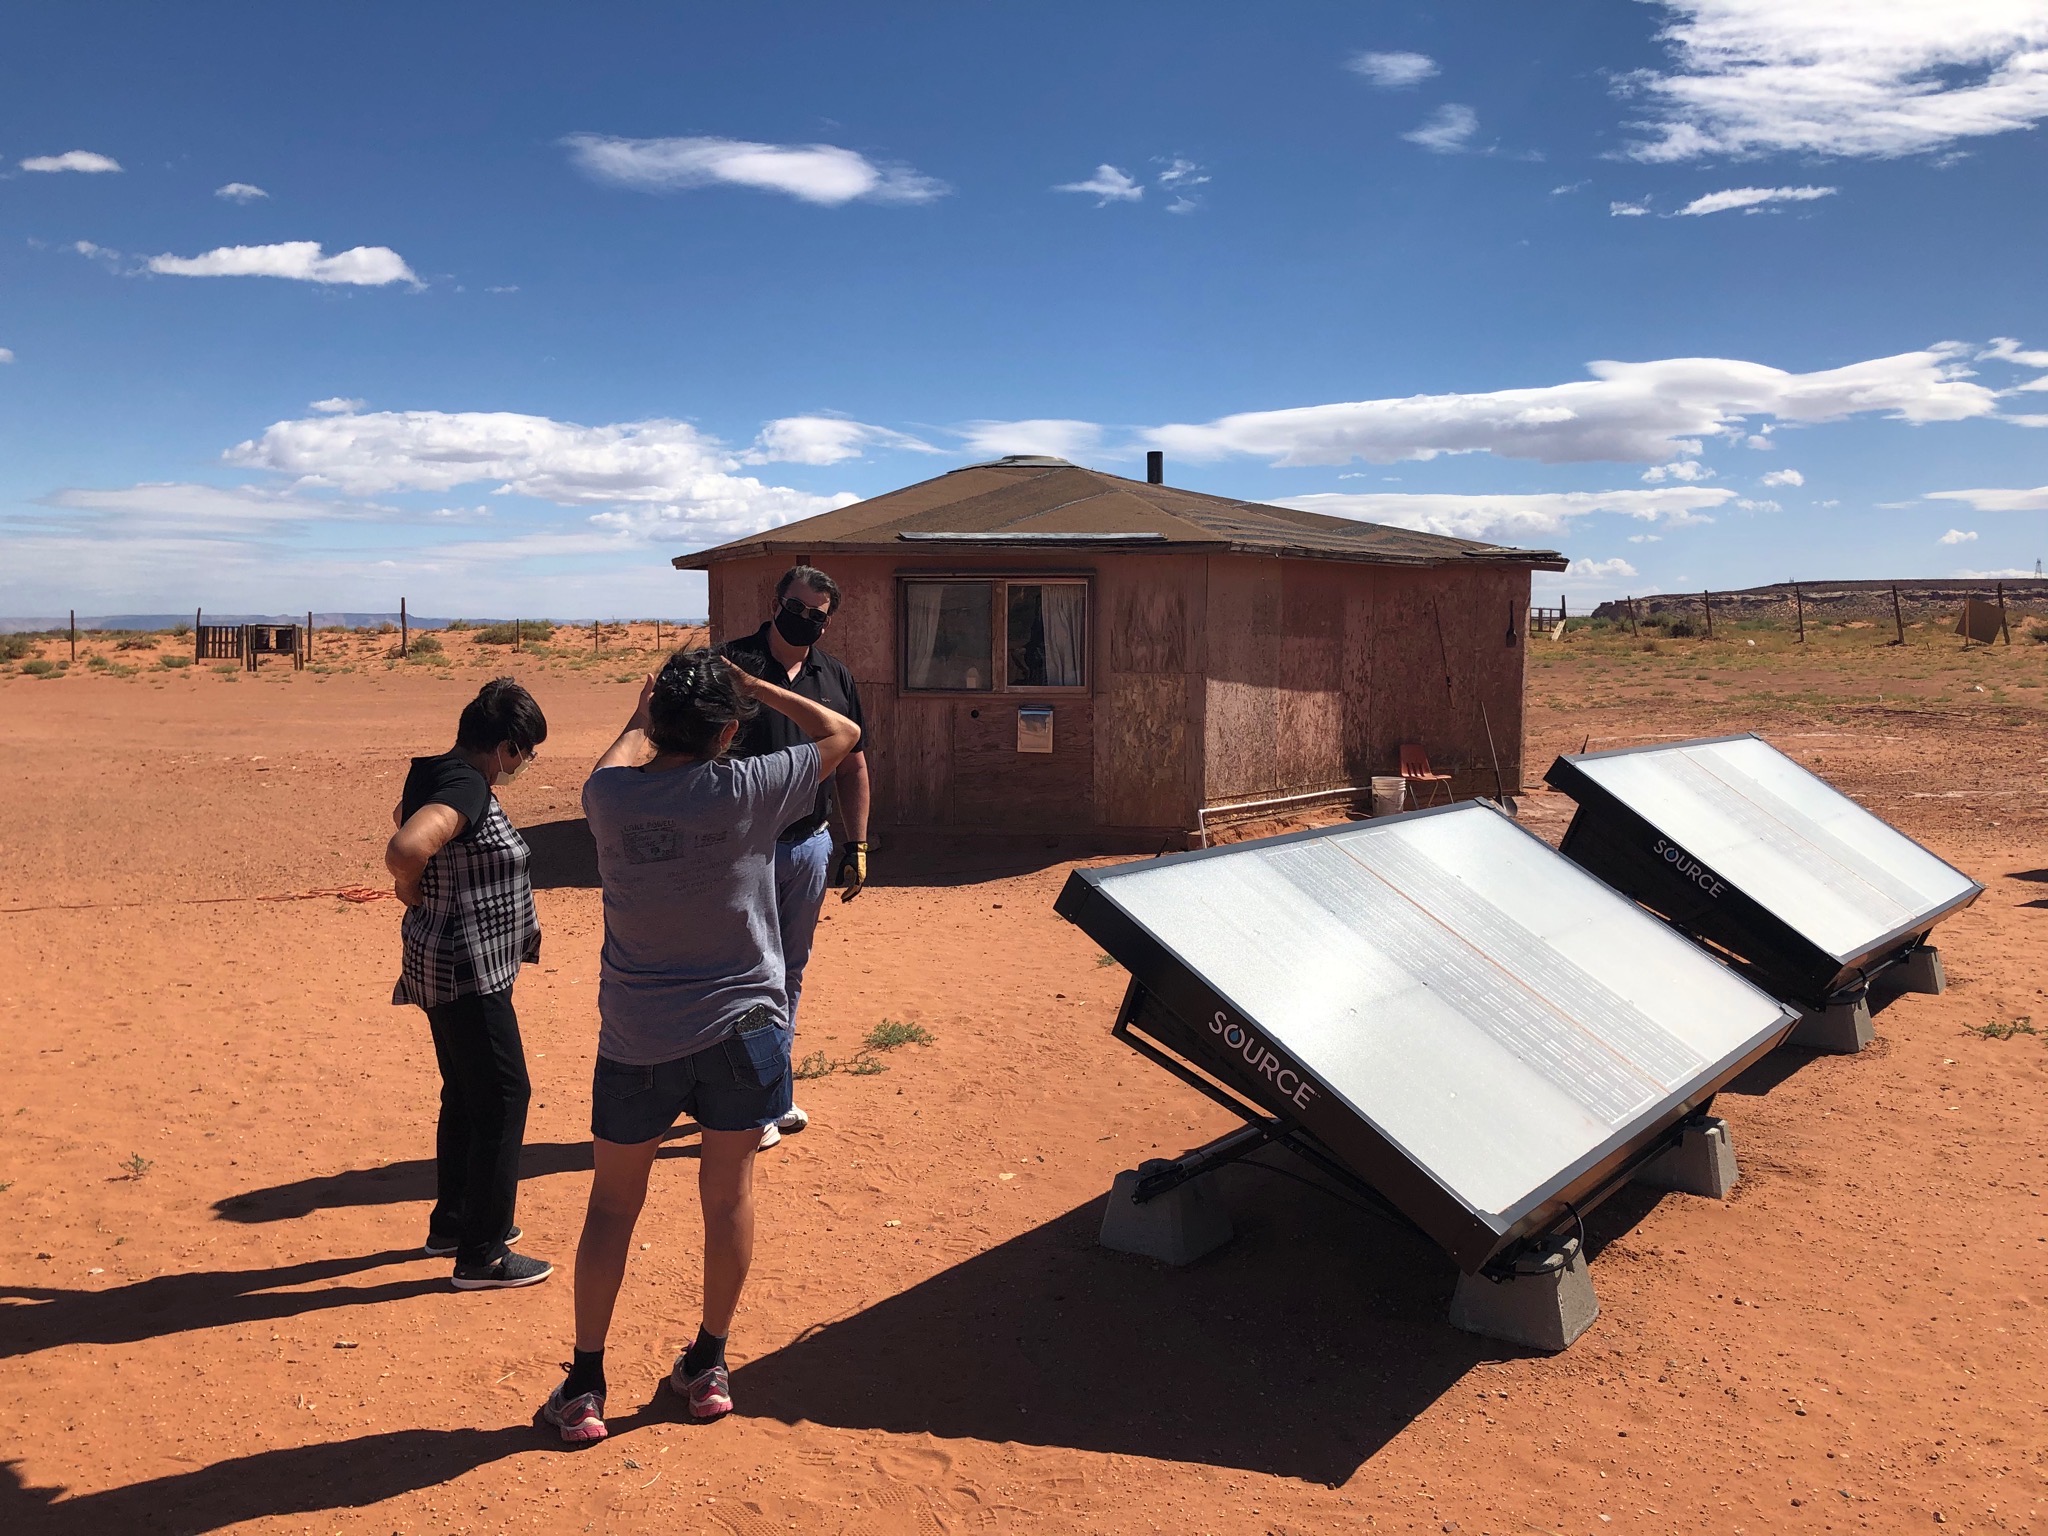 “A standard, two-panel array, produces 4-10 liters of water each day, and has 60 liters of storage capacity. The size of each panel is 4 feet by 8 feet, lasts for 15 years and utilises solar power and a small battery to enable water production,” said Cody Frisen, CEO of Zero Mass Water. “The quality of water produced exceeds the standards of every country where the systems have been deployed.”